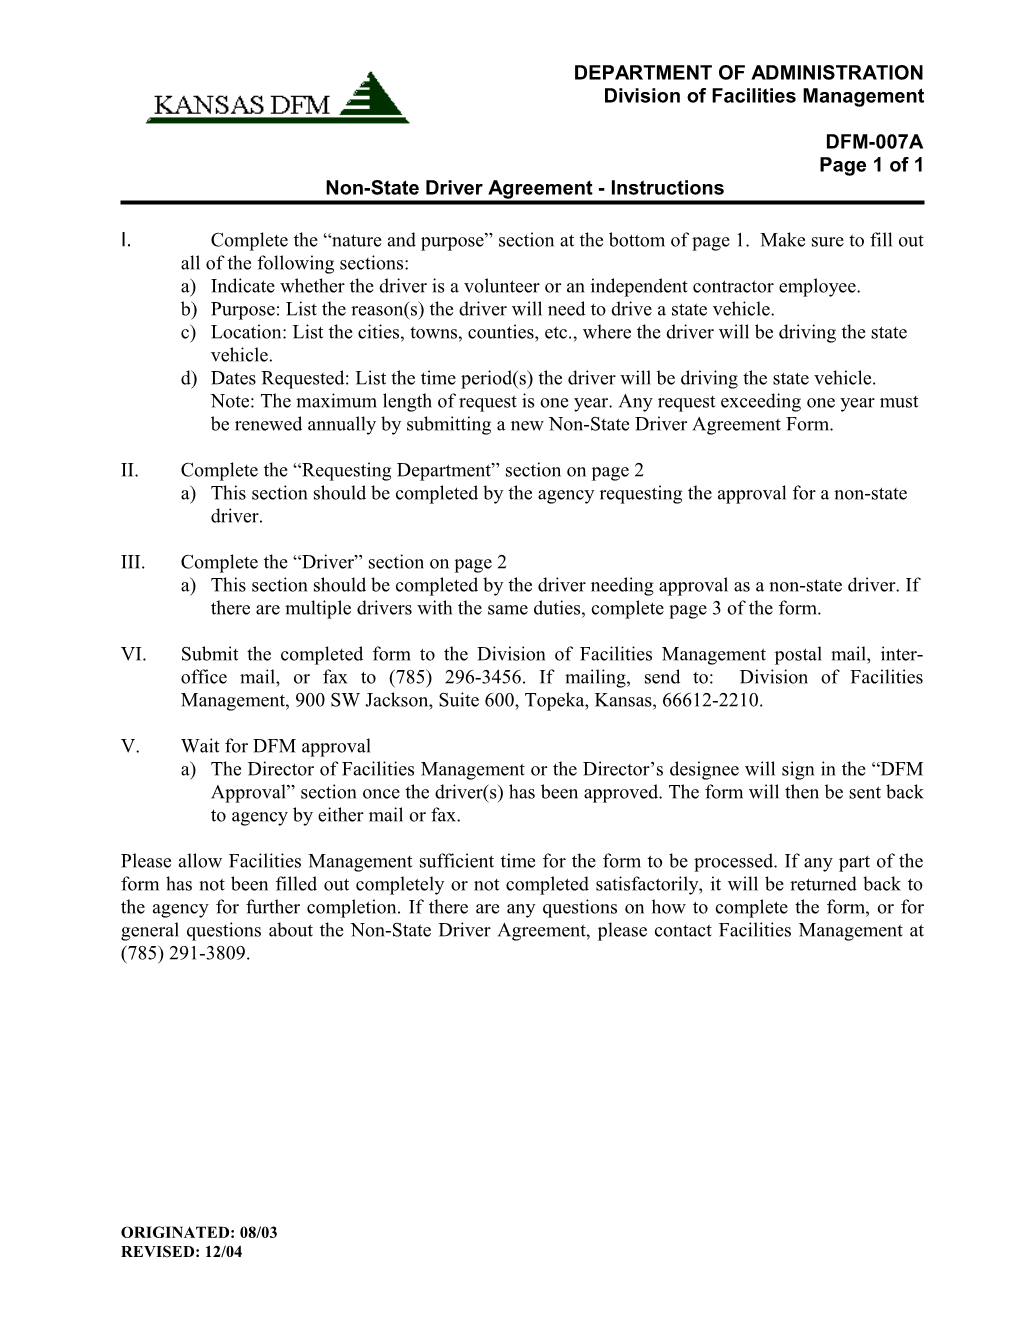 Non-State Driver Agreement - Instructions